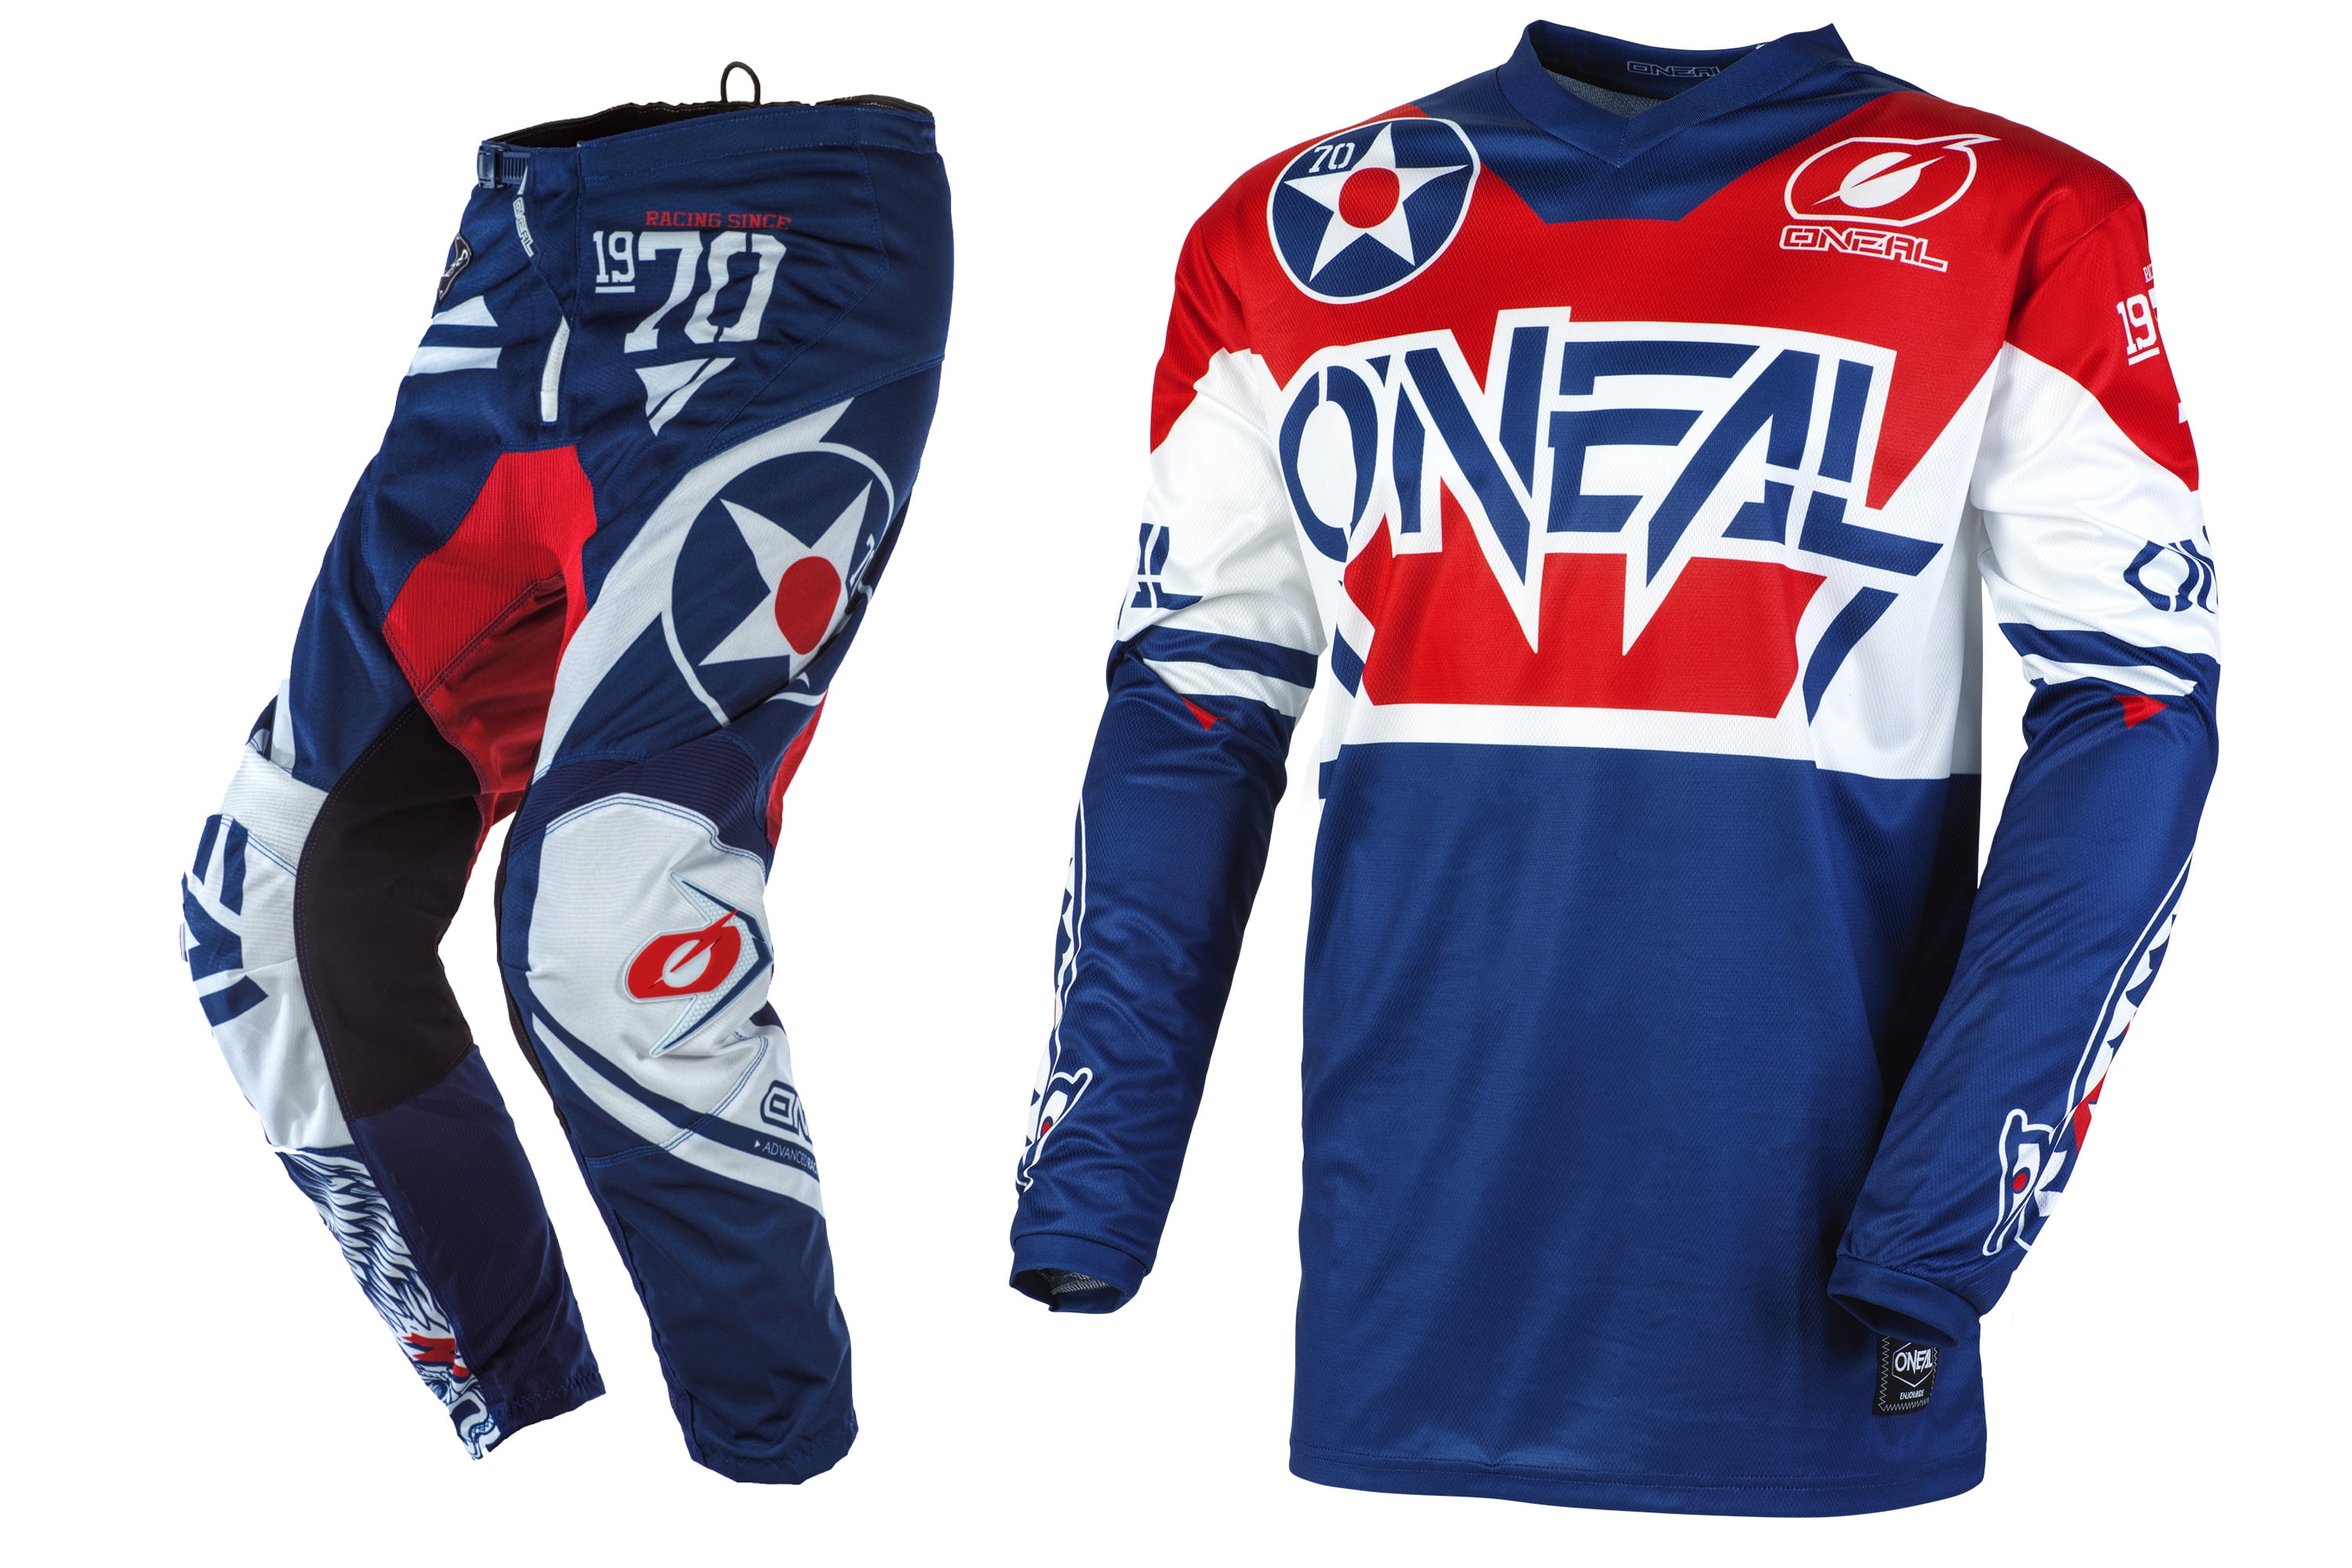 Oneal Youth/Kids Element Warhawk Blue/Red Motocross Jersey Pant Combo 